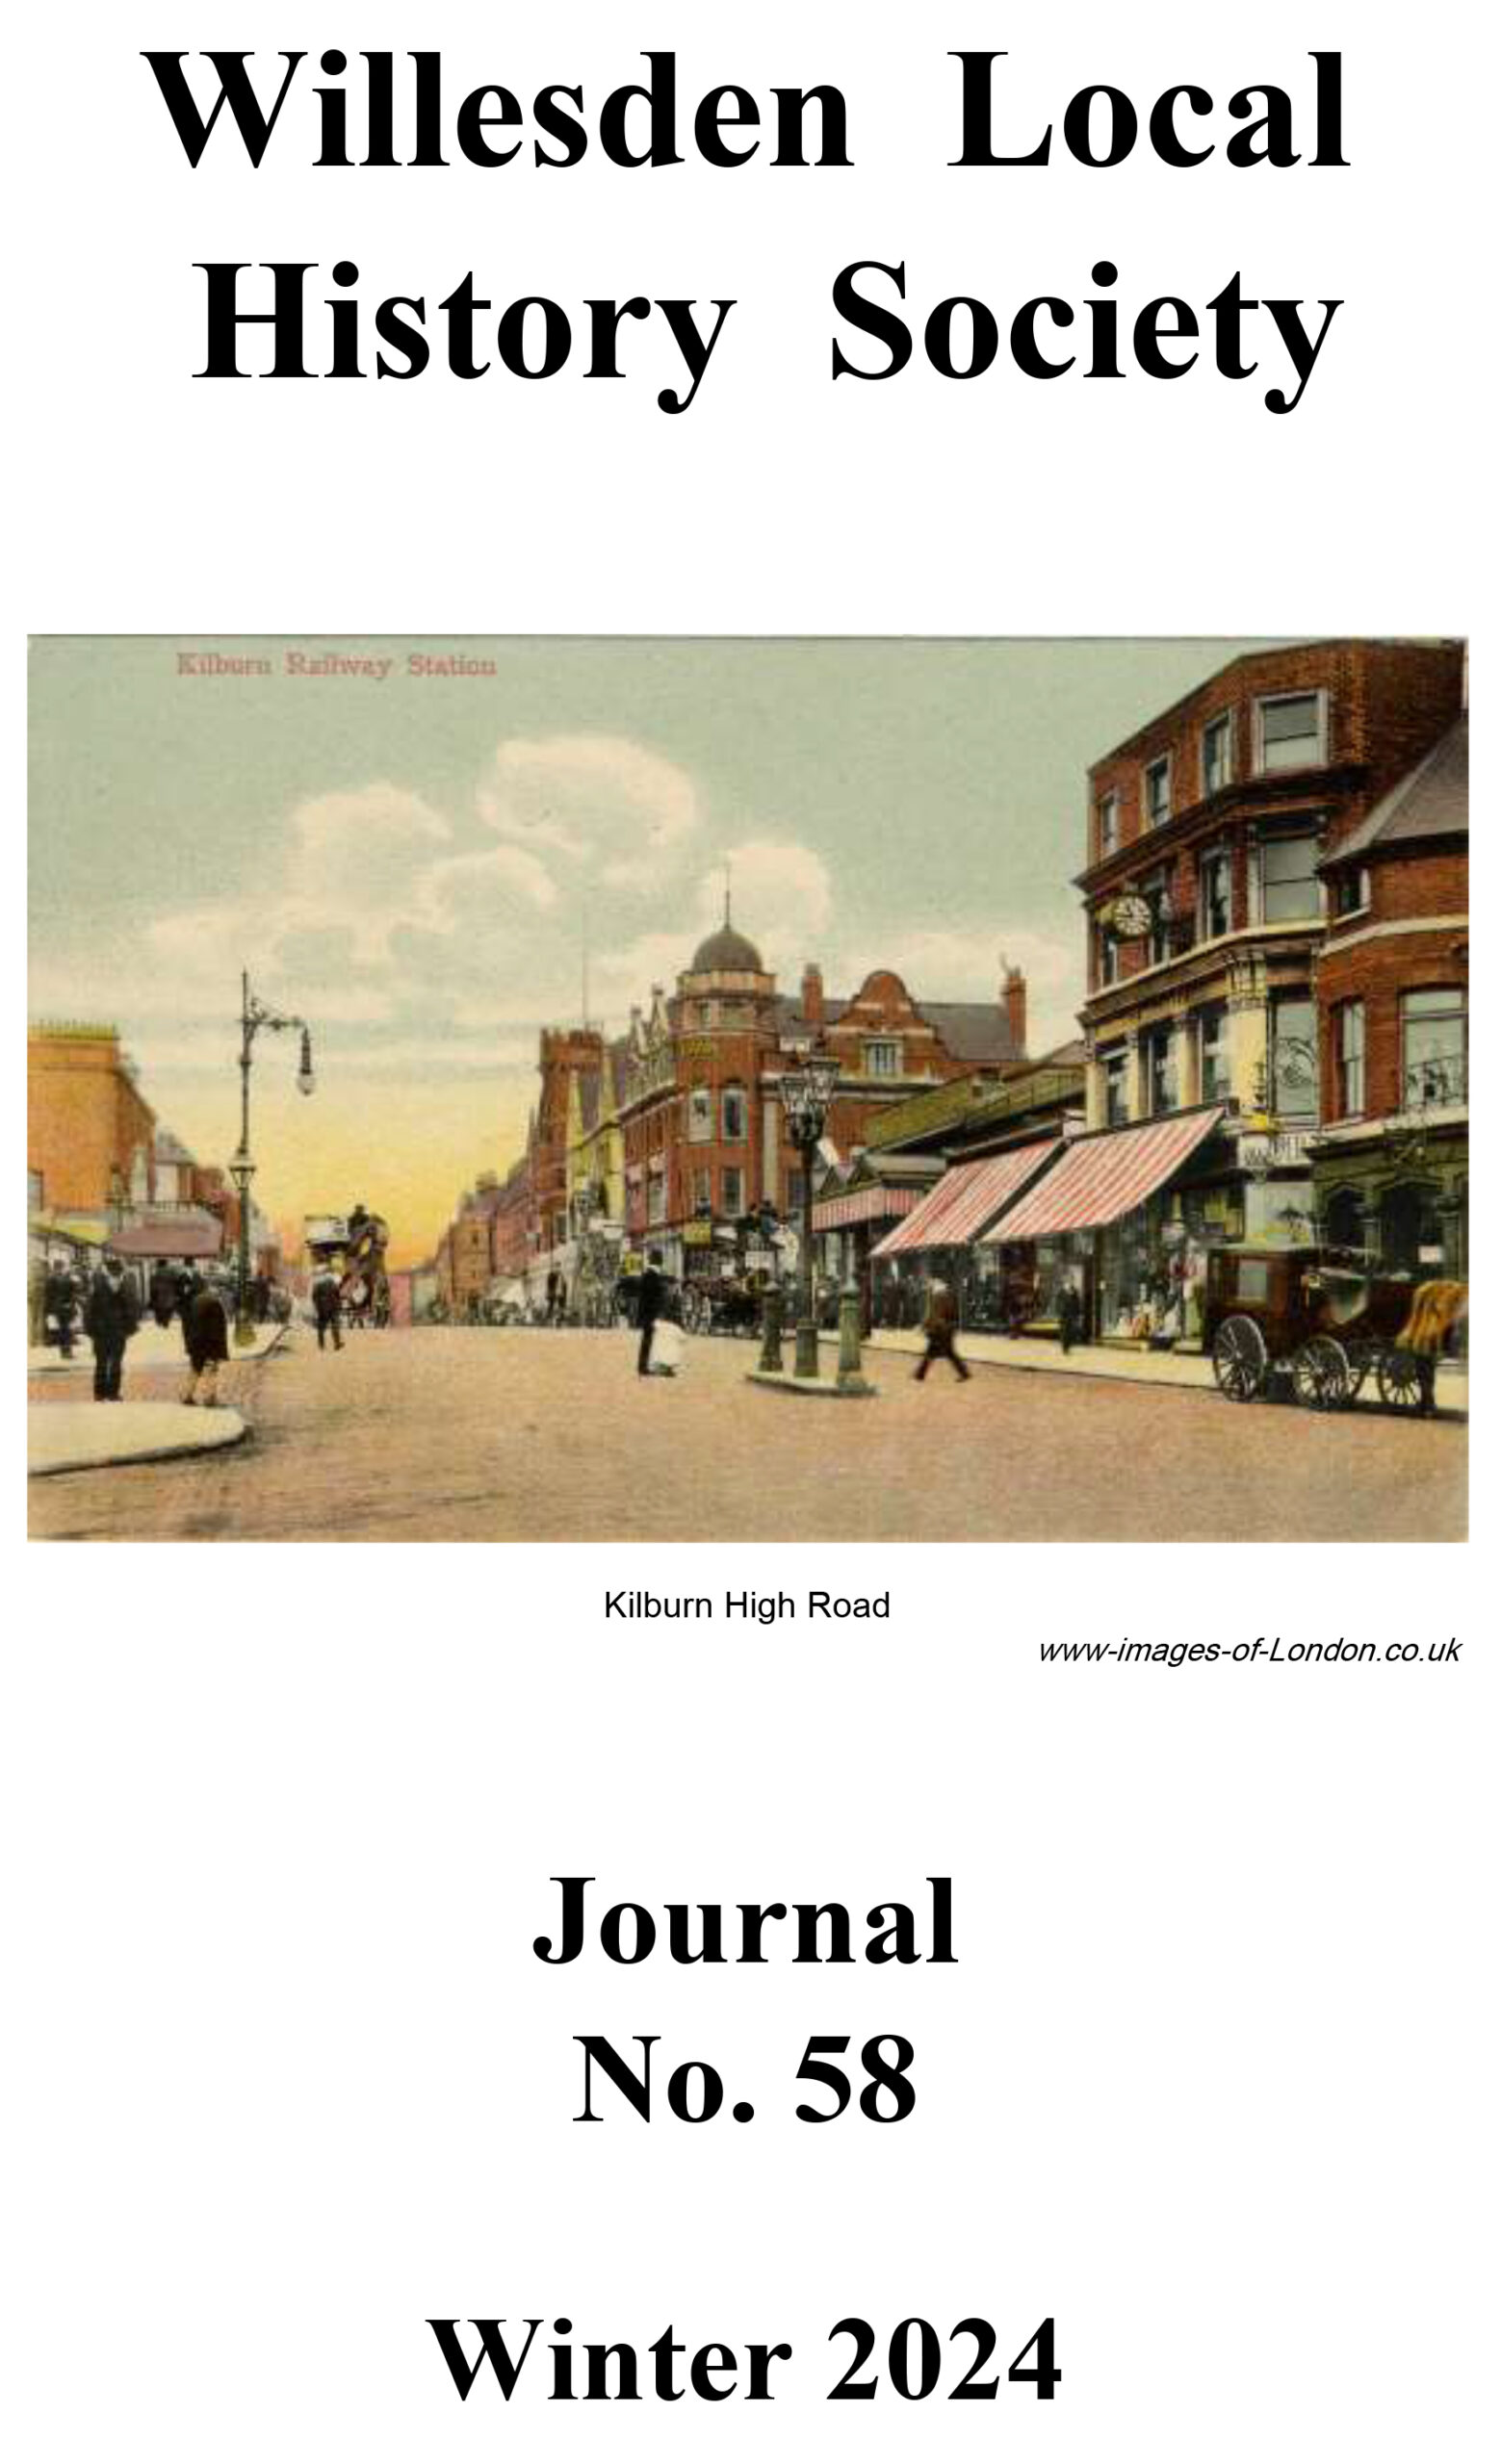 Willesden Local History Society Journal 58